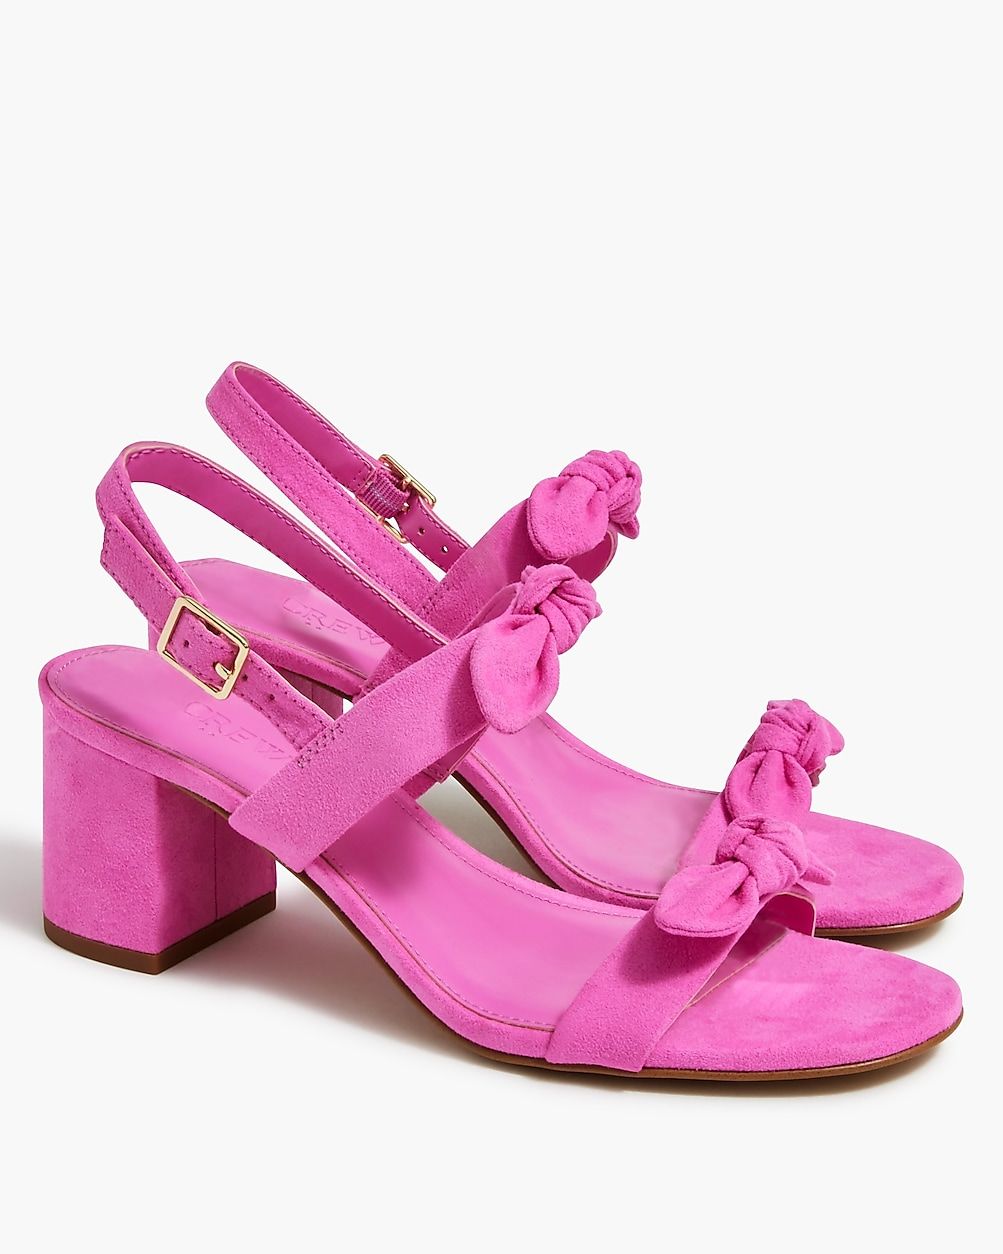 Bow heeled sandals | J.Crew Factory